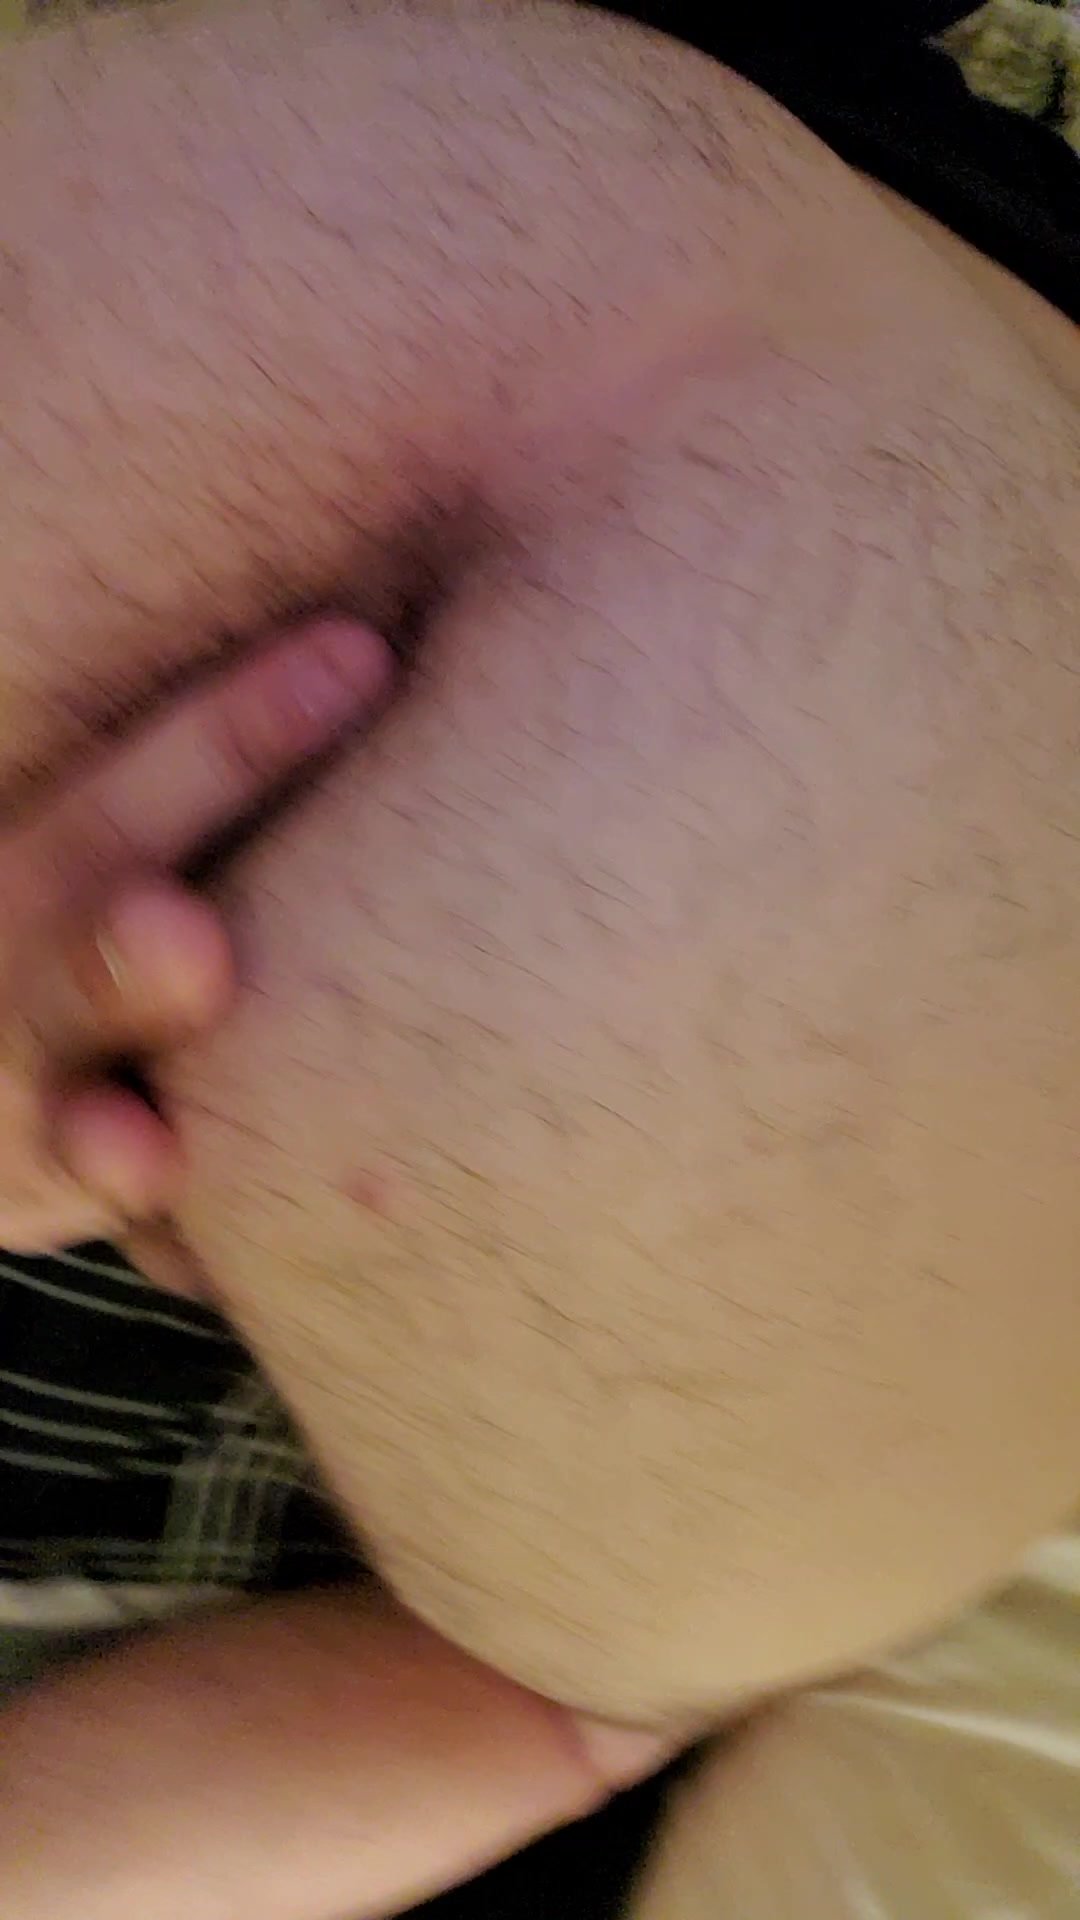 Come sniff that hairy musky asss